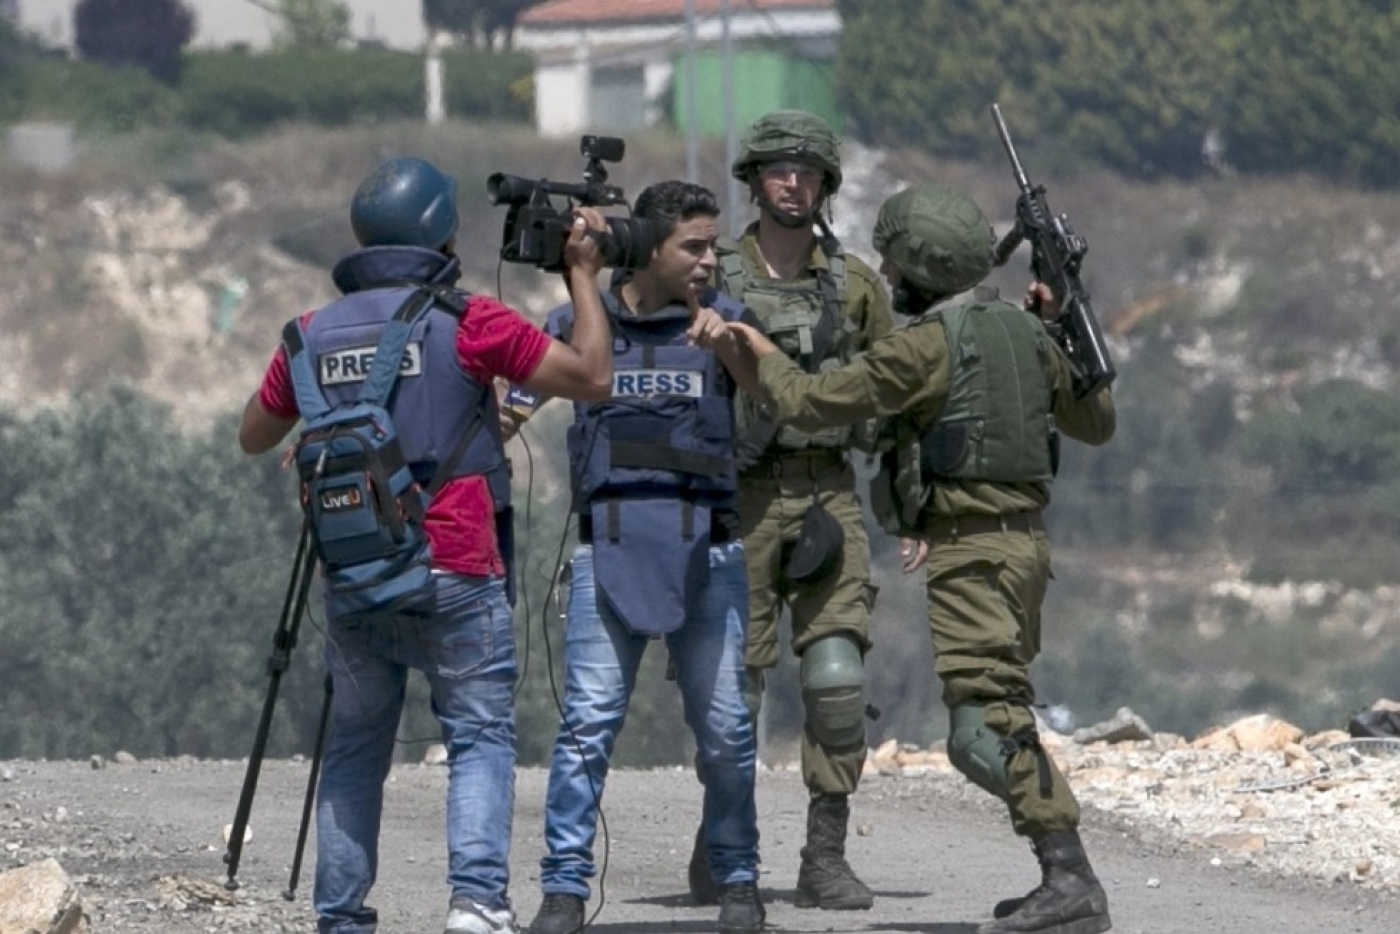 Media watchdogs slam 'politically motivated' arrests of Palestinian journalists | Middle East Eye